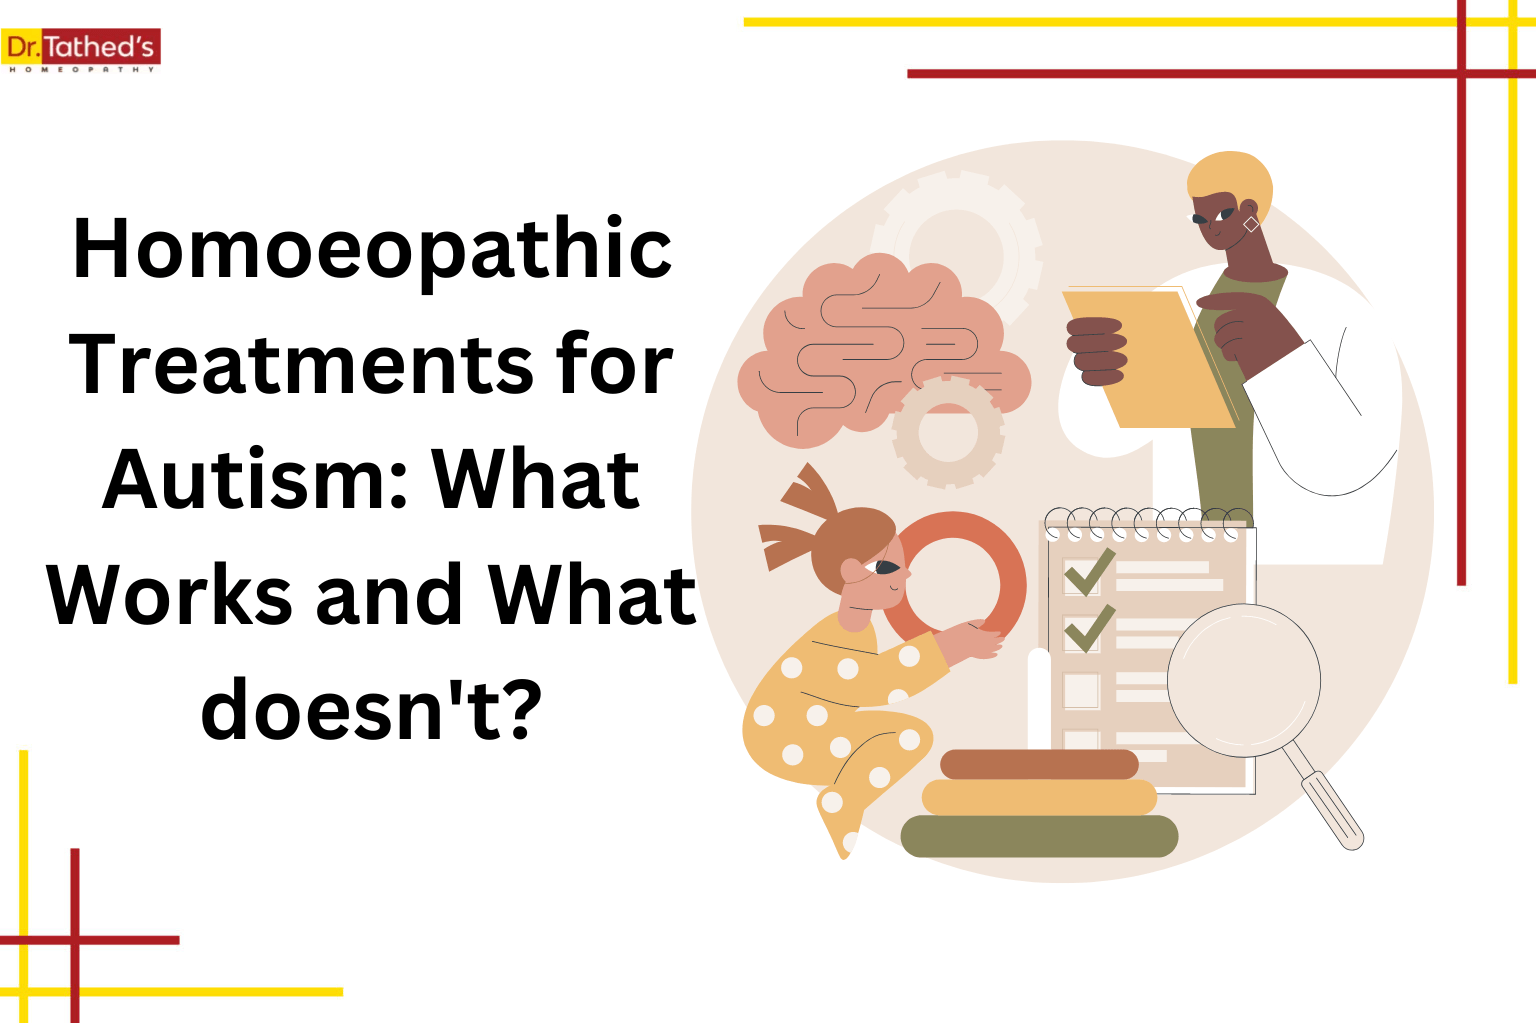 Homoeopathic Treatments for Autism: What Works and What doesn't